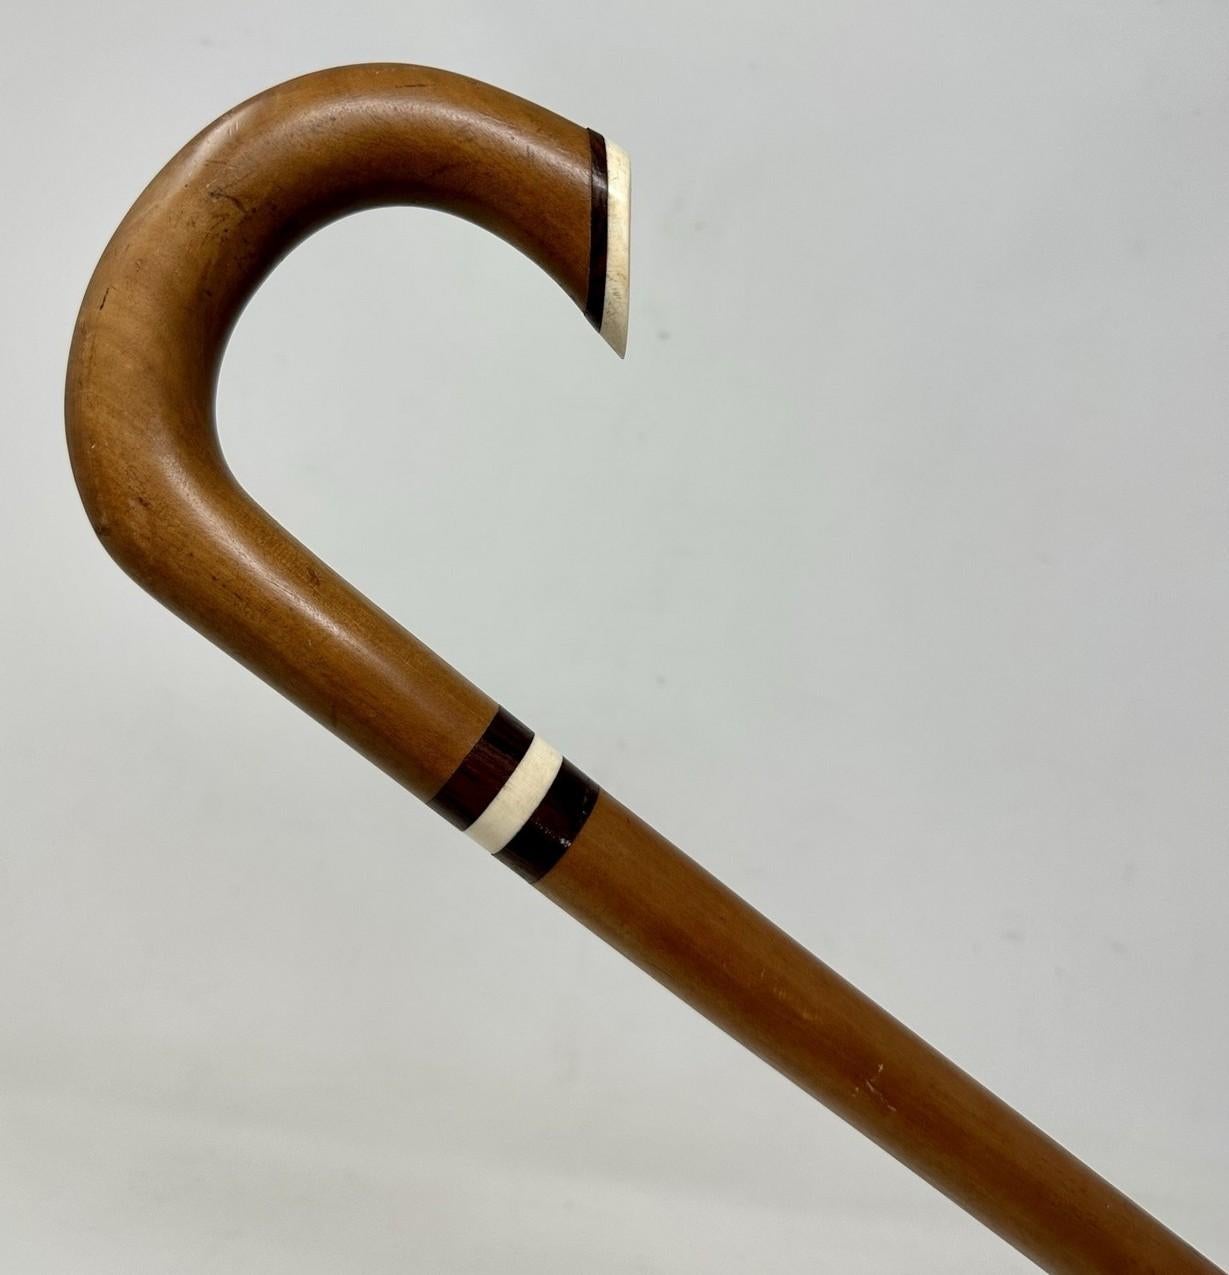 Antique Vintage English Ladys Gentlemas Malacca Wooden Walking Stick Cane 1920   In Good Condition For Sale In Dublin, Ireland